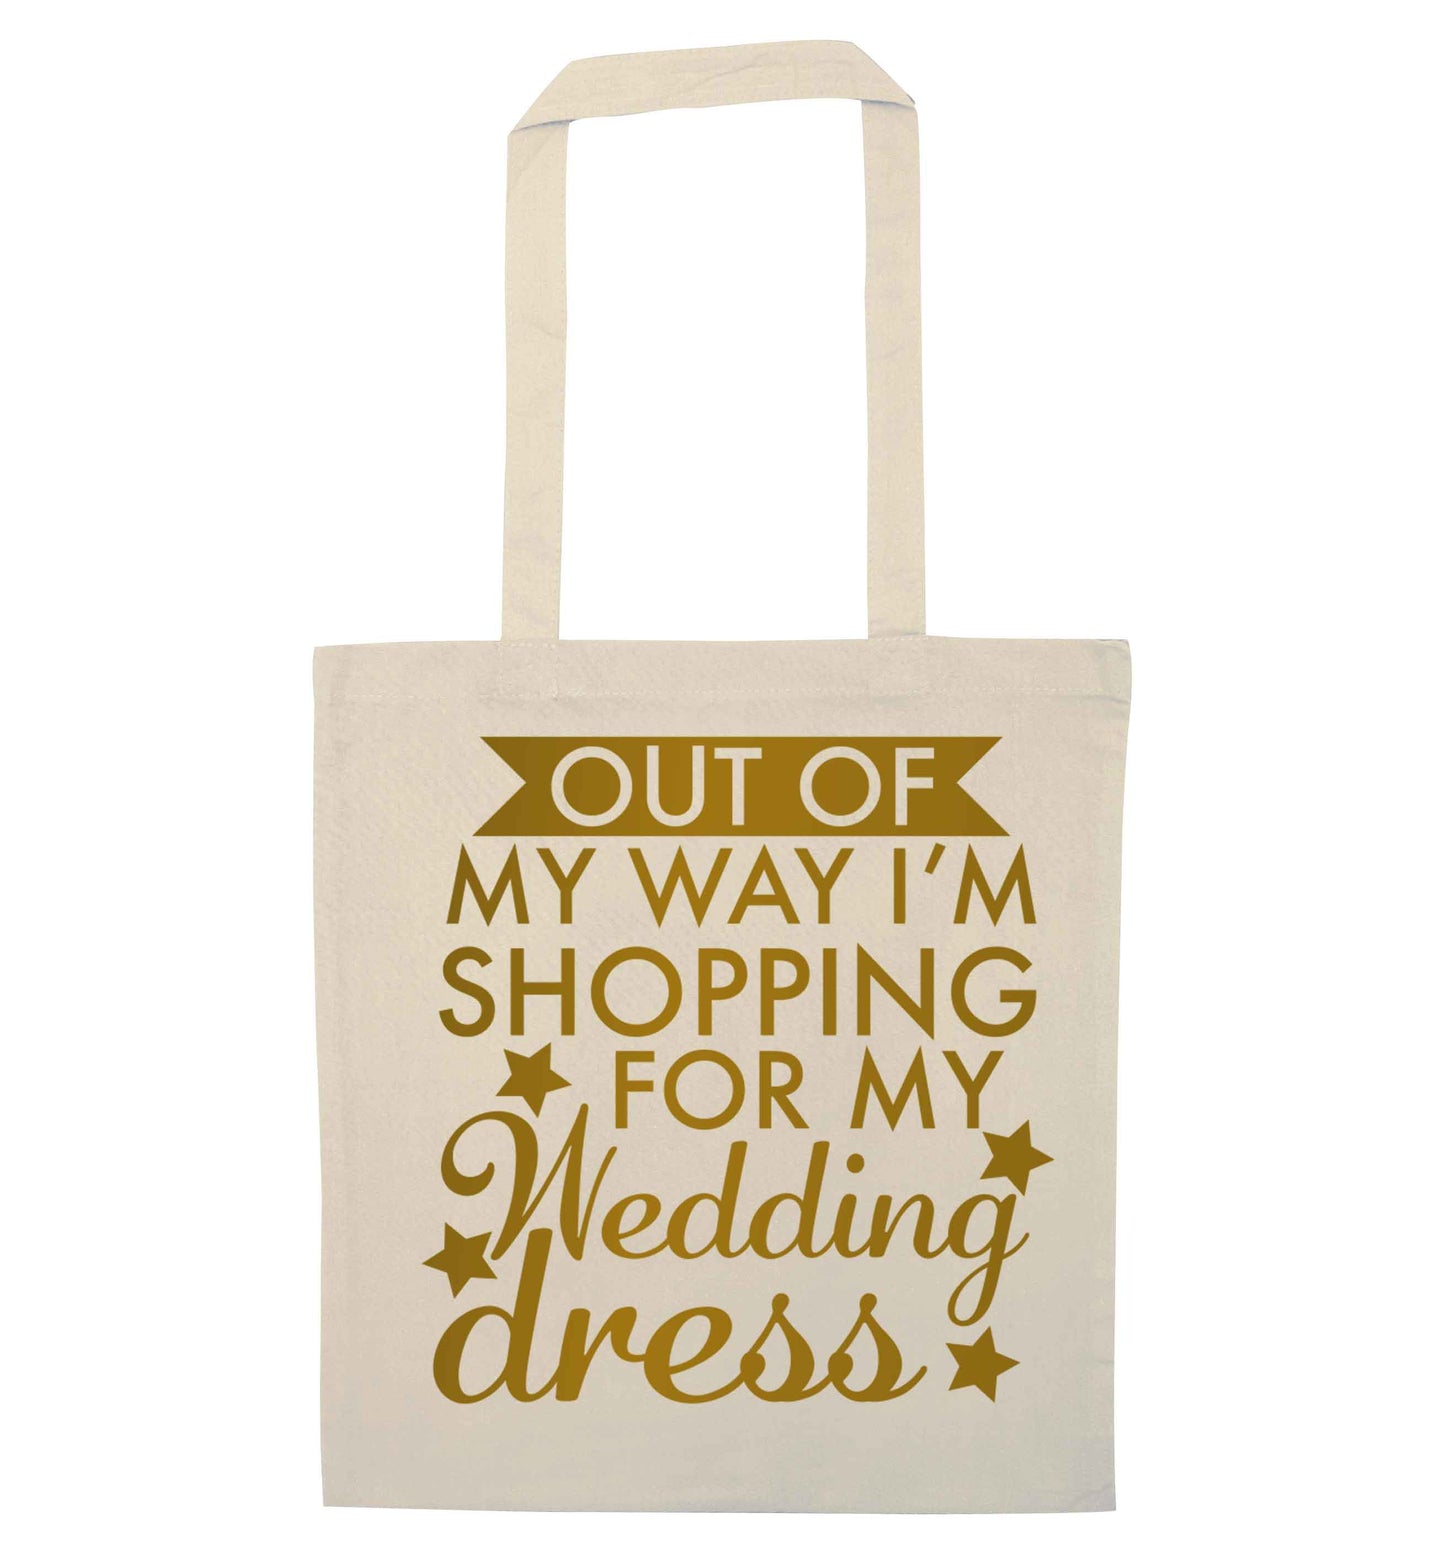 Out of my way I'm shopping for my wedding dress natural tote bag